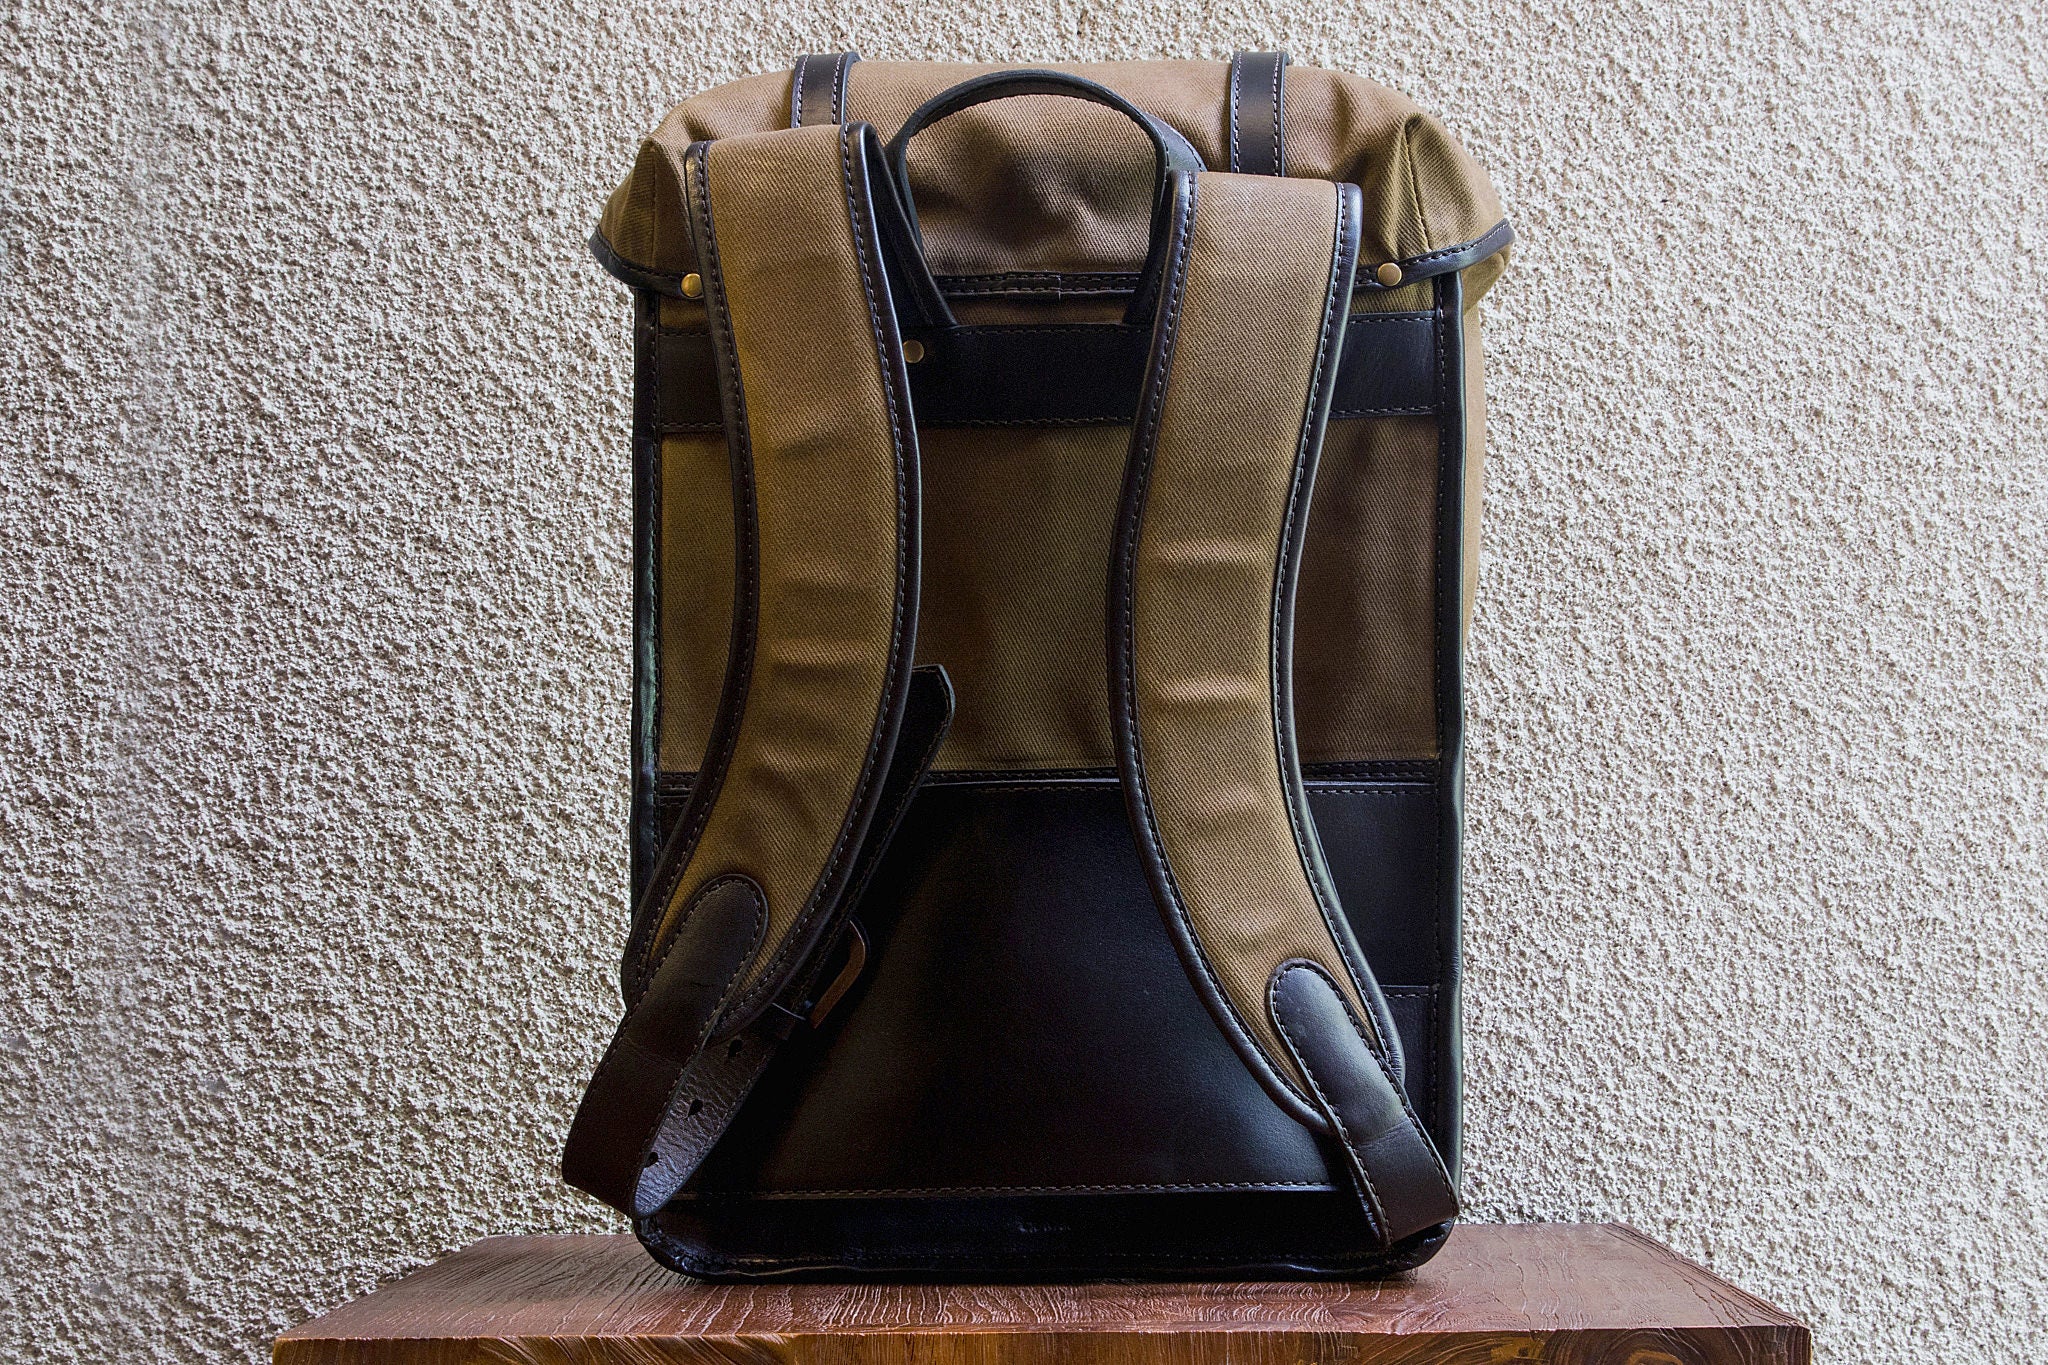 Daypack/Mocca - Waxed Twill